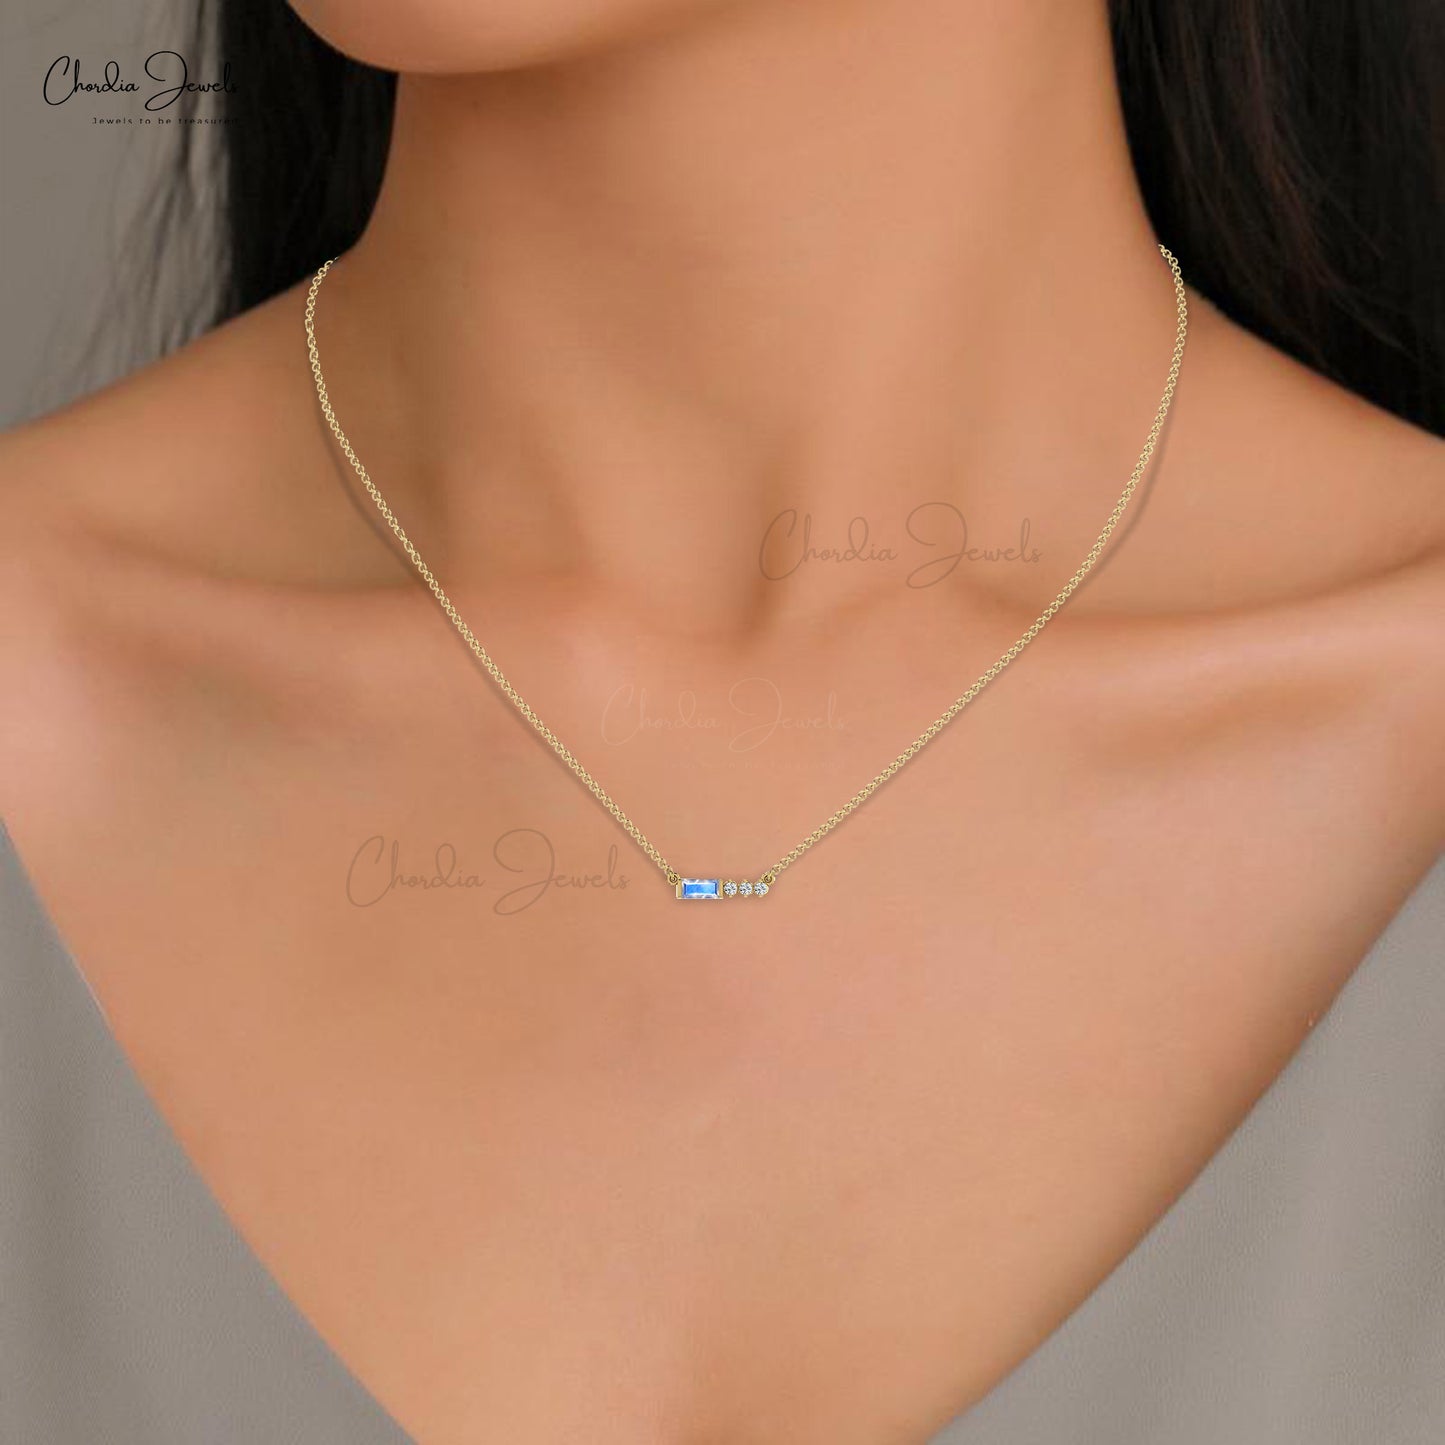 Natural Rainbow Moonstone Necklace, 14k Solid Gold Necklace, 6x3mm Baguette Cut Gemstone Necklace, June Birthstone & Diamond Necklace, Gift for Her